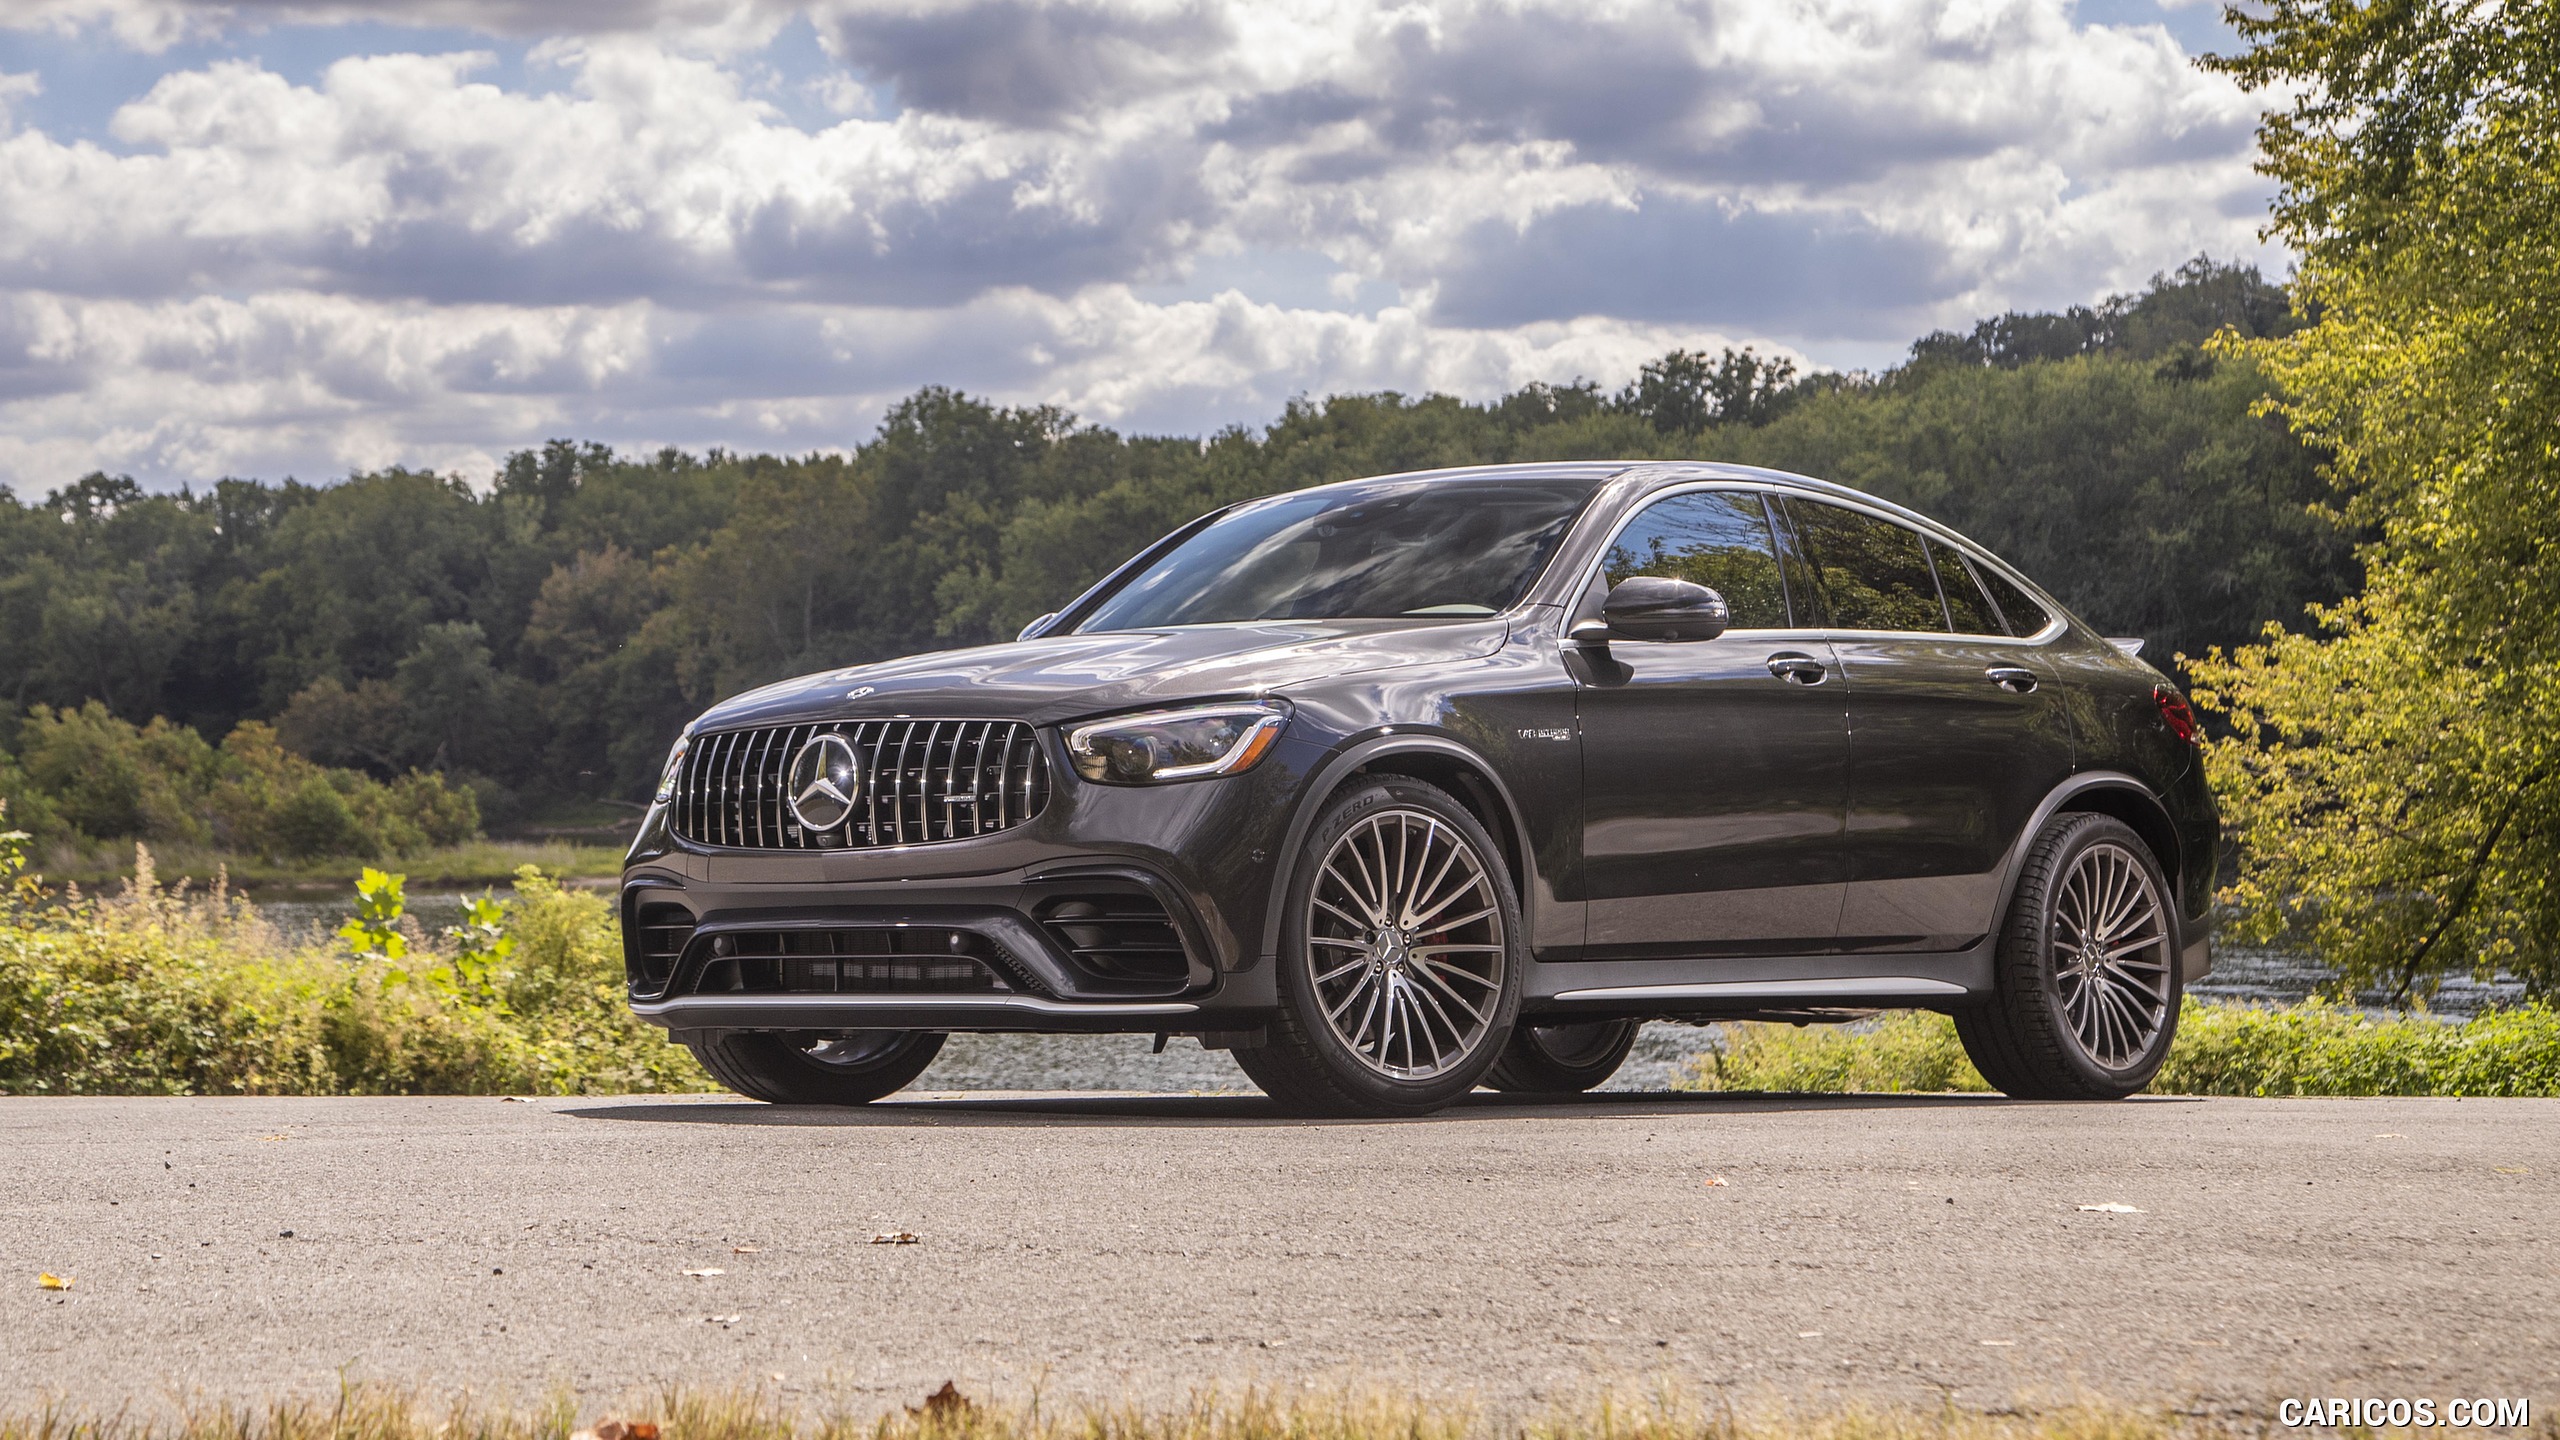 2020 Mercedes-AMG GLC 63 S Coupe (US-Spec) - Front Three-Quarter, #53 of 102